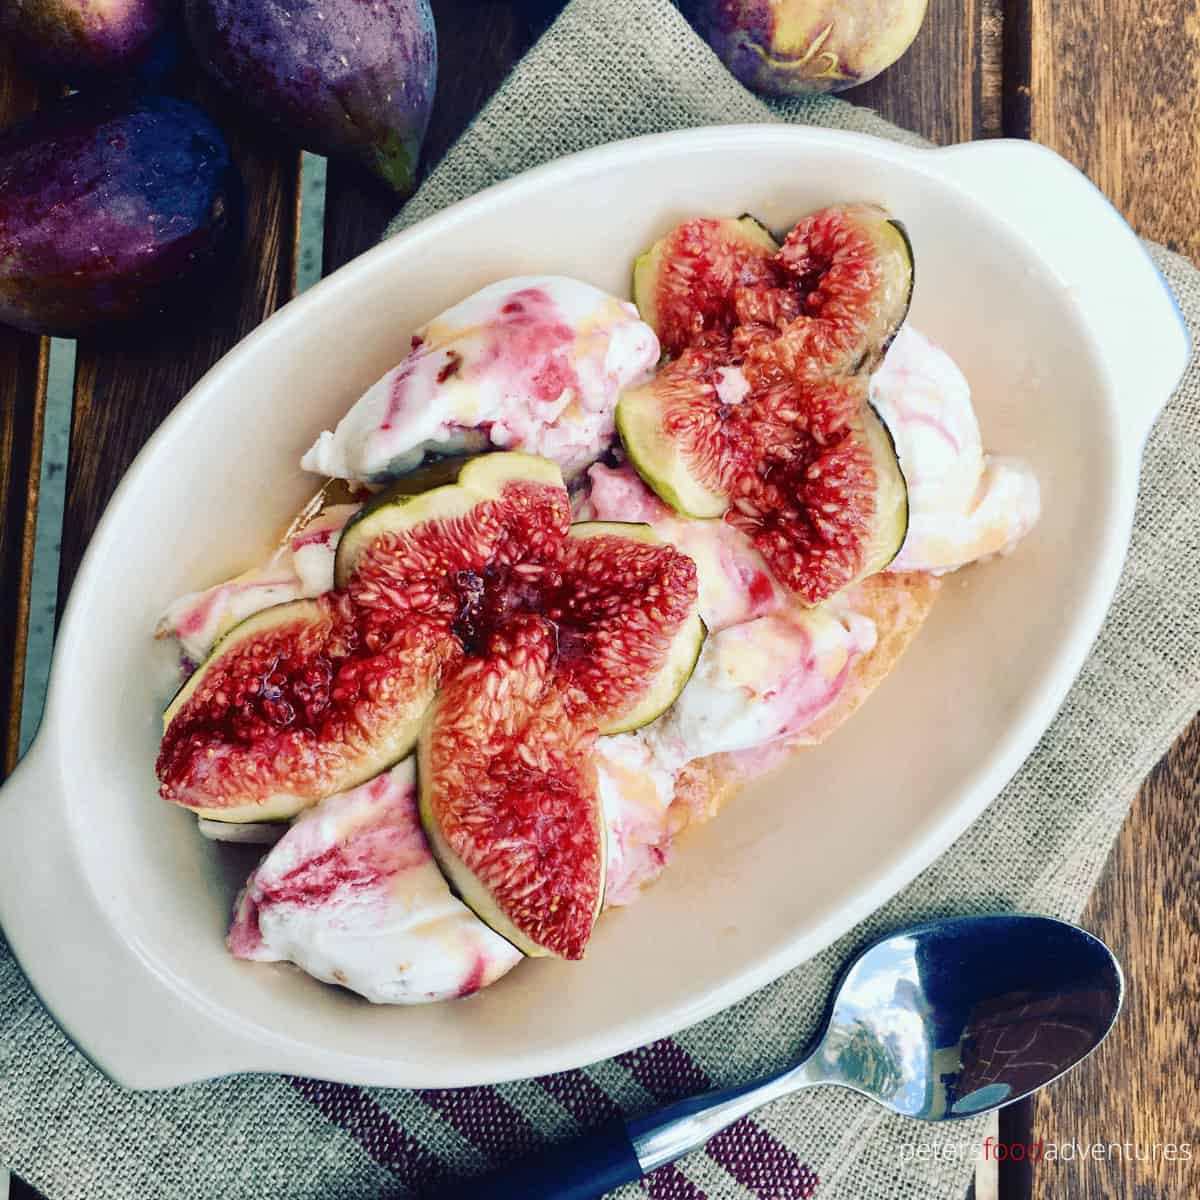 Roasted Figs with Honey is a delicious and easy fresh fig dessert, served warm over vanilla ice cream or frozen Greek yogurt, that is sure to impress.